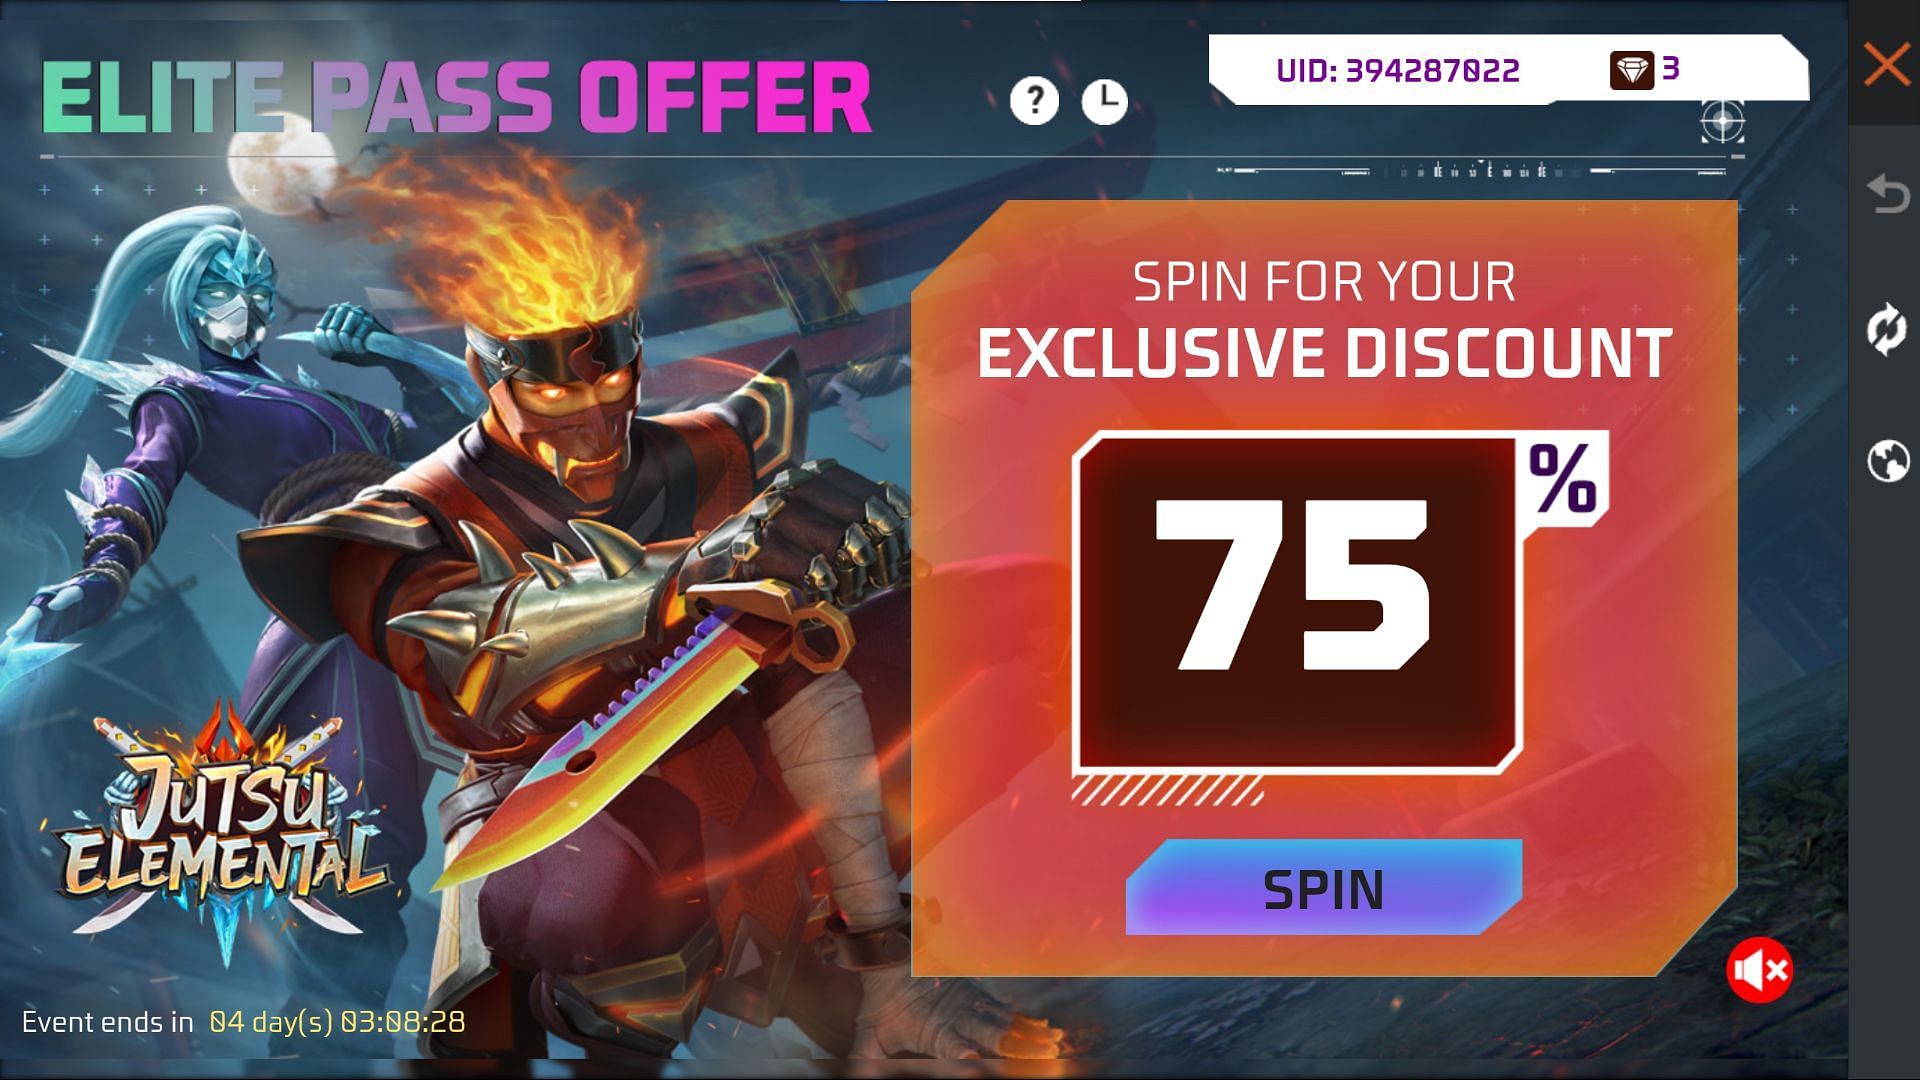 The offer requires users to make a spin to find the discount (Image via Garena)